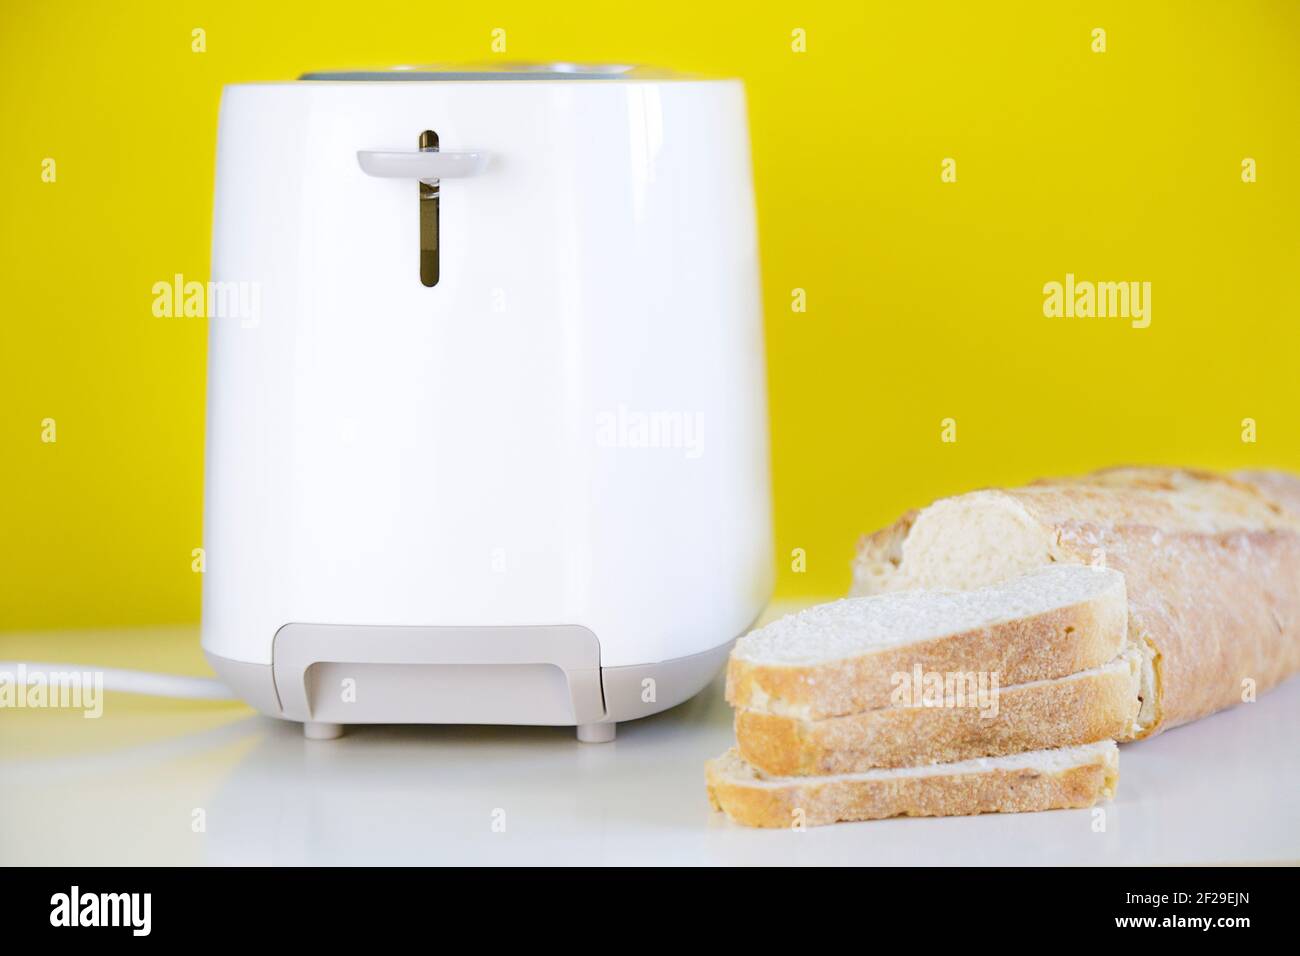 Toaster and and some pieces of french bread against yellow background Stock Photo